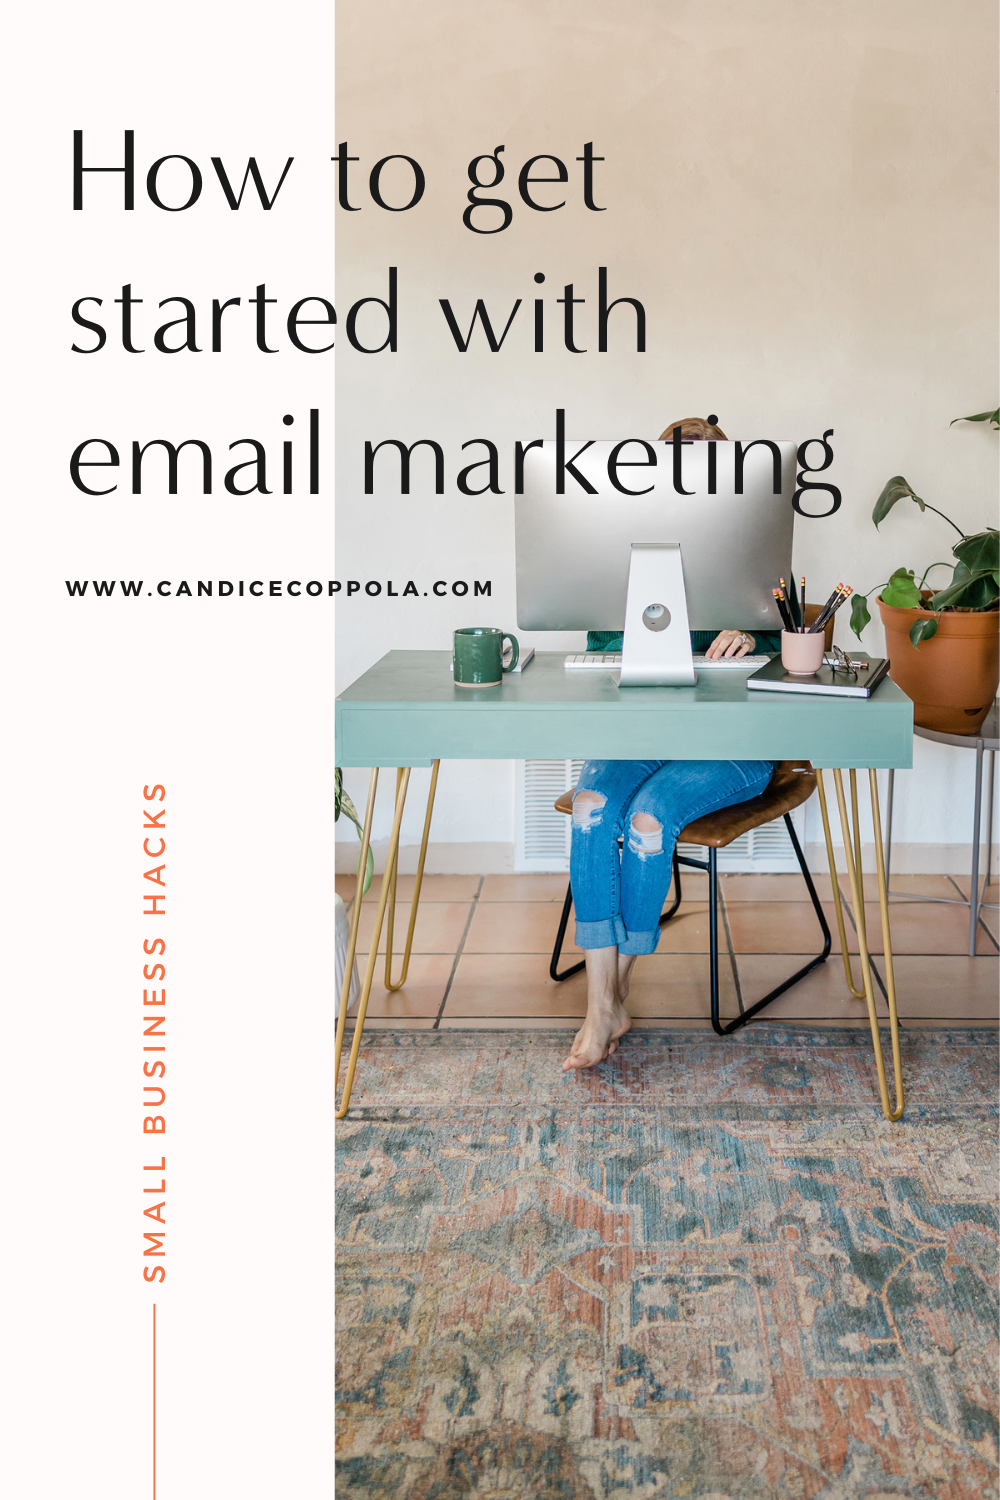 Use the Flodesk Promo Code CANDICE50 and receive 50% off the email marketing software for your first year. For only $19 a month, you can scale your business with a powerful (and pretty) email marketing tool that'll be sure to have your customers buying your products and services.